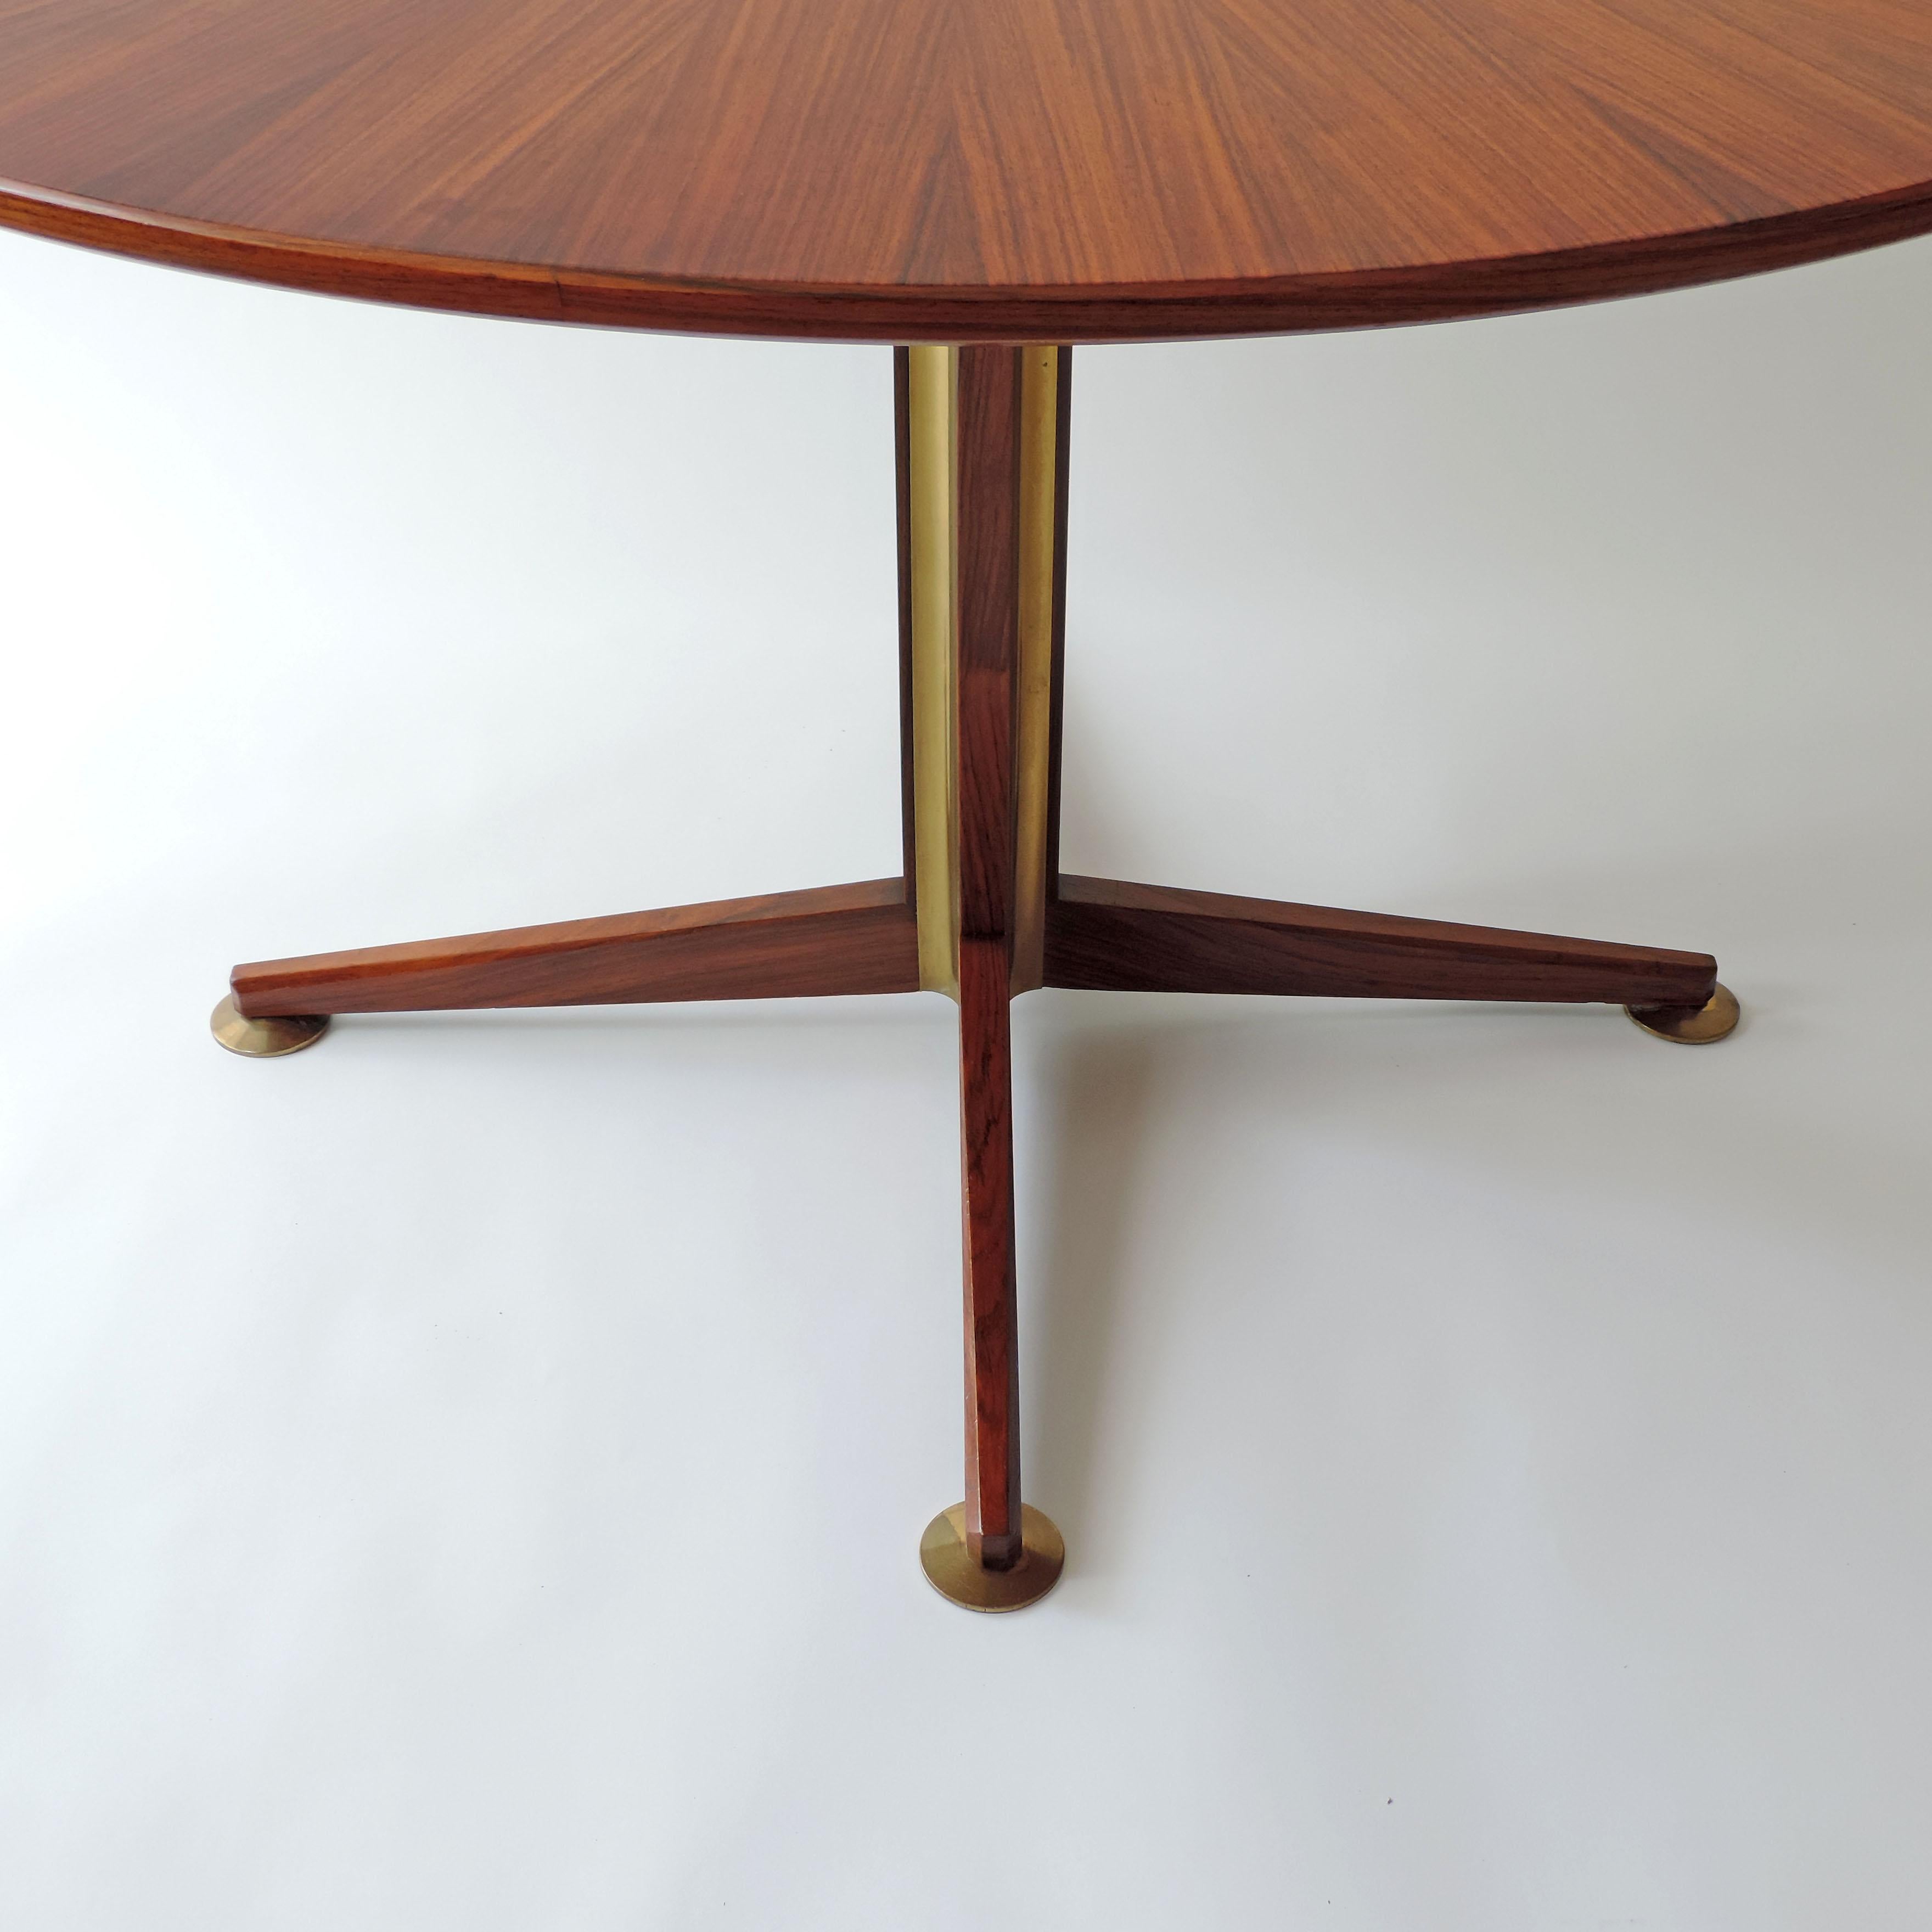 Osvaldo Borsani circular dining table in wood and brass details, Italy, 1960s For Sale 1